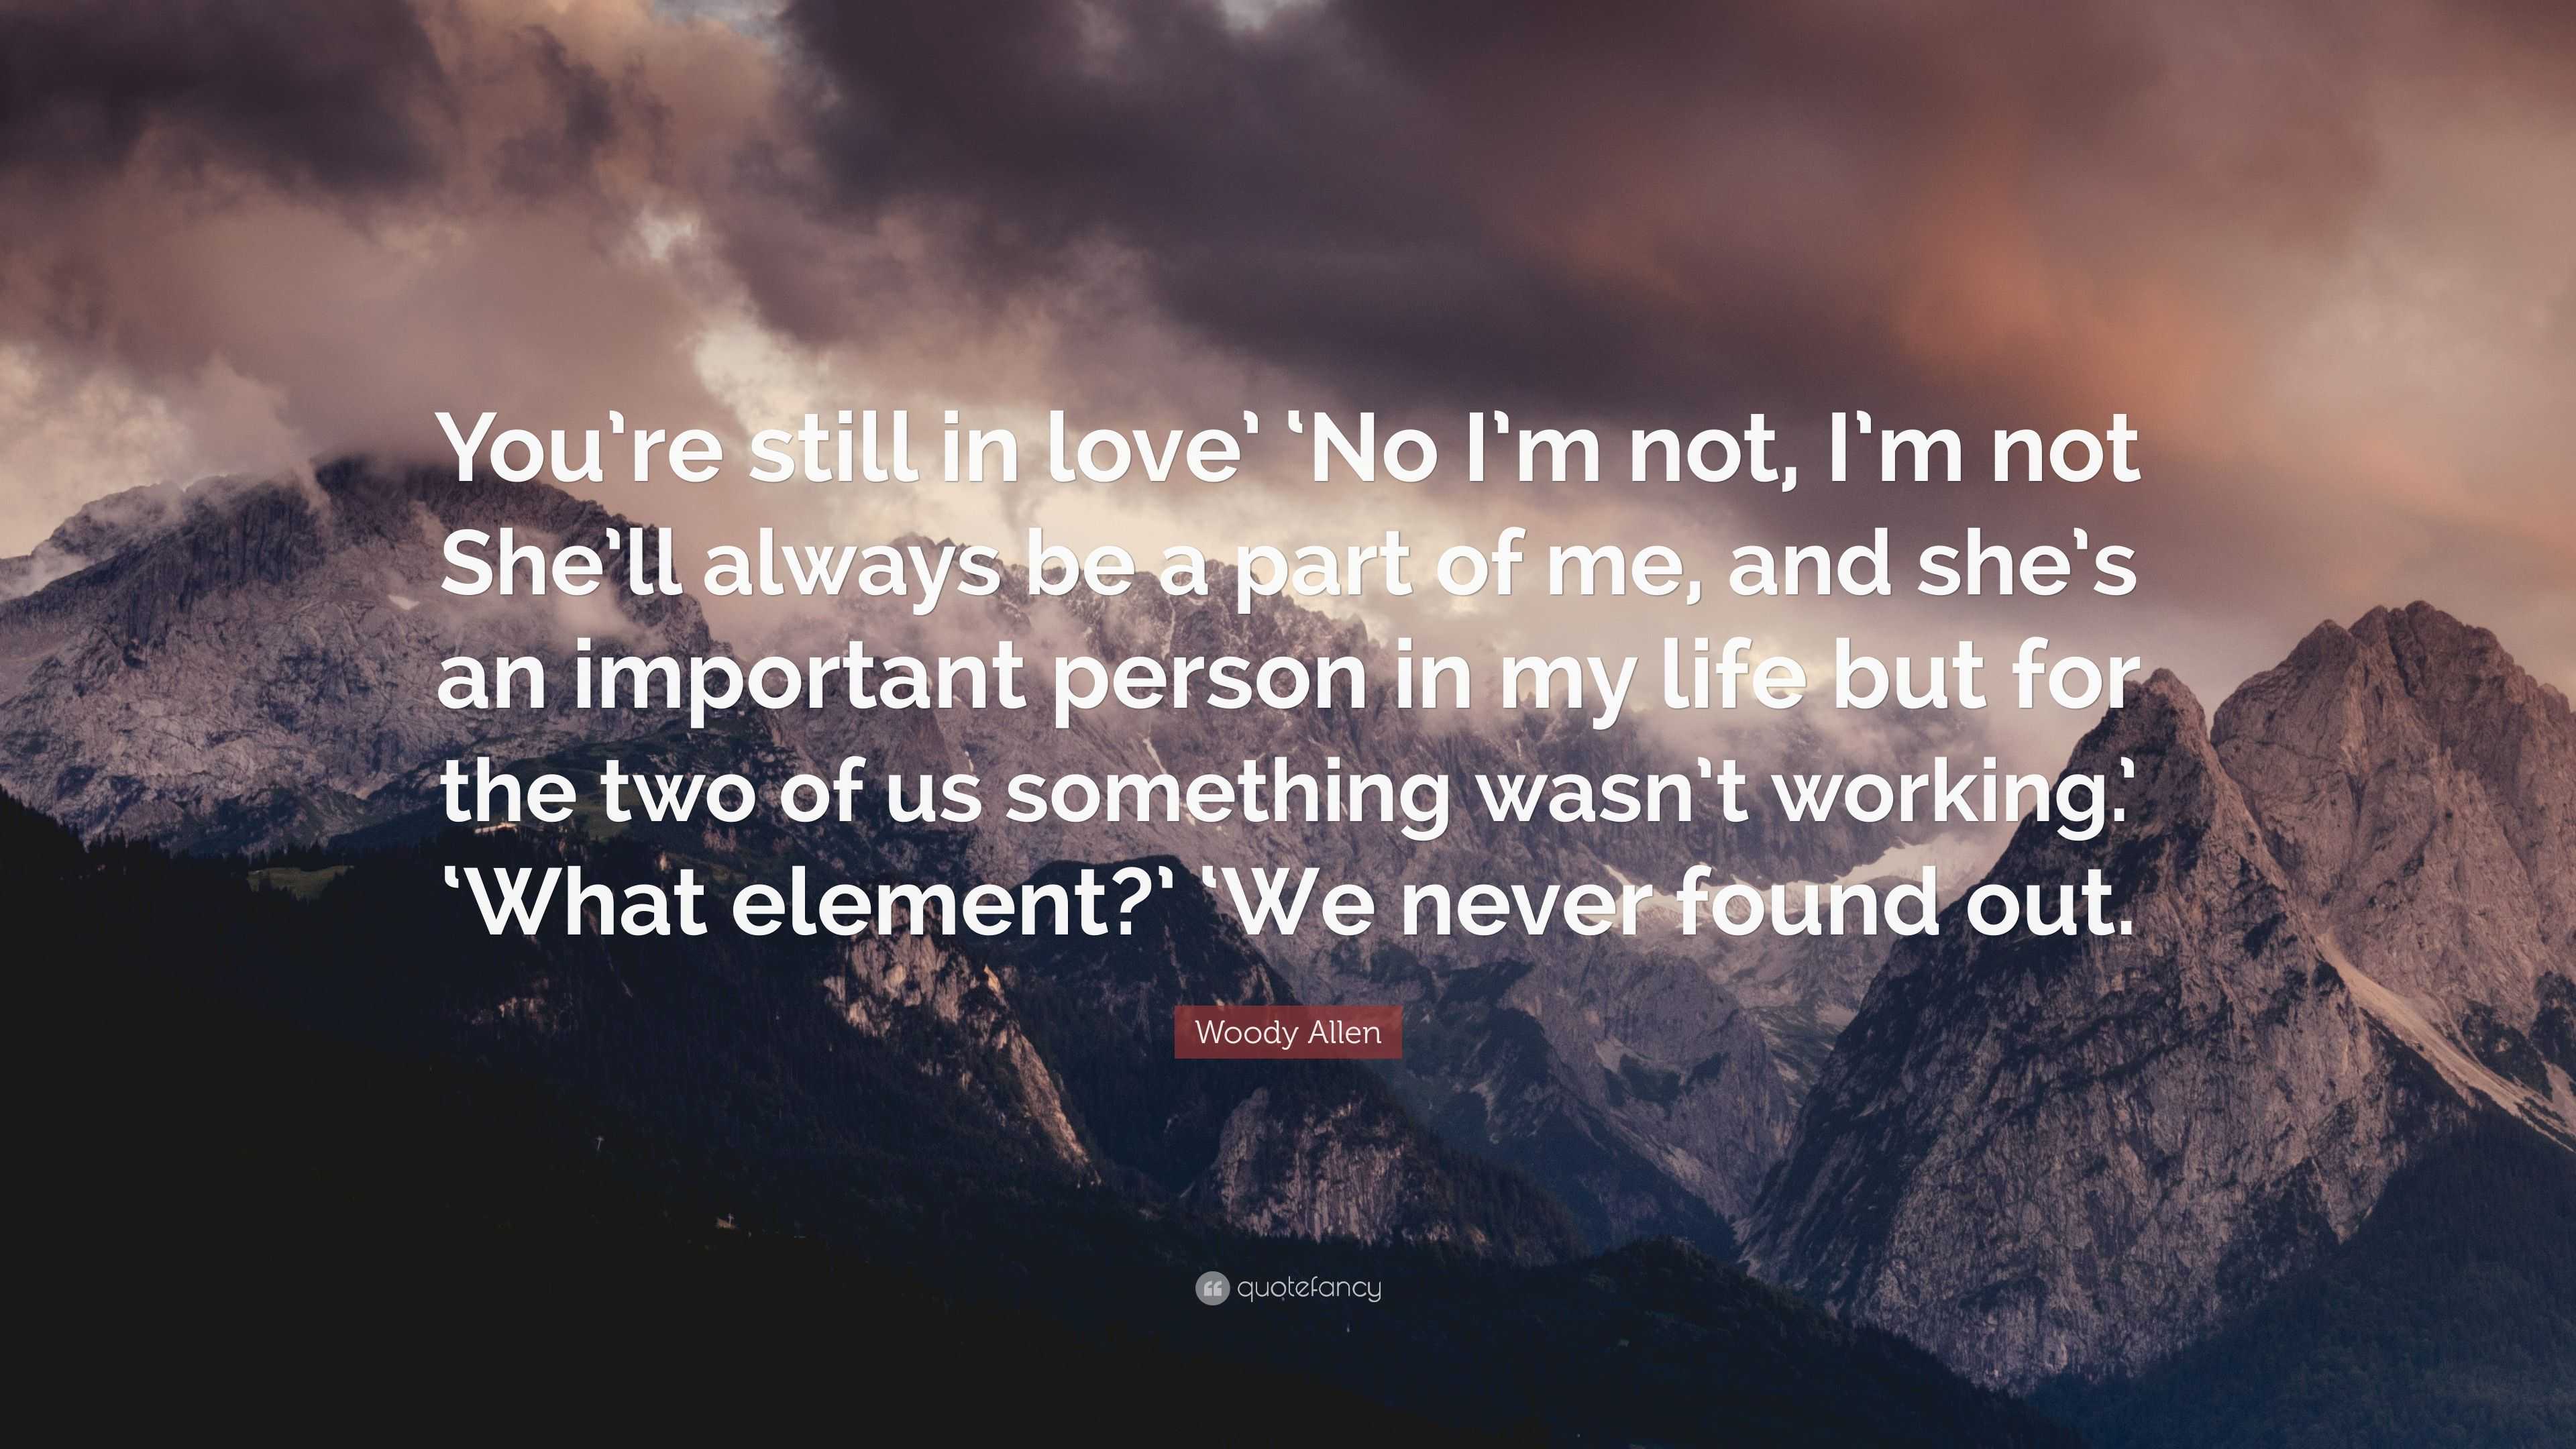 Woody Allen Quote “You re still in love No I